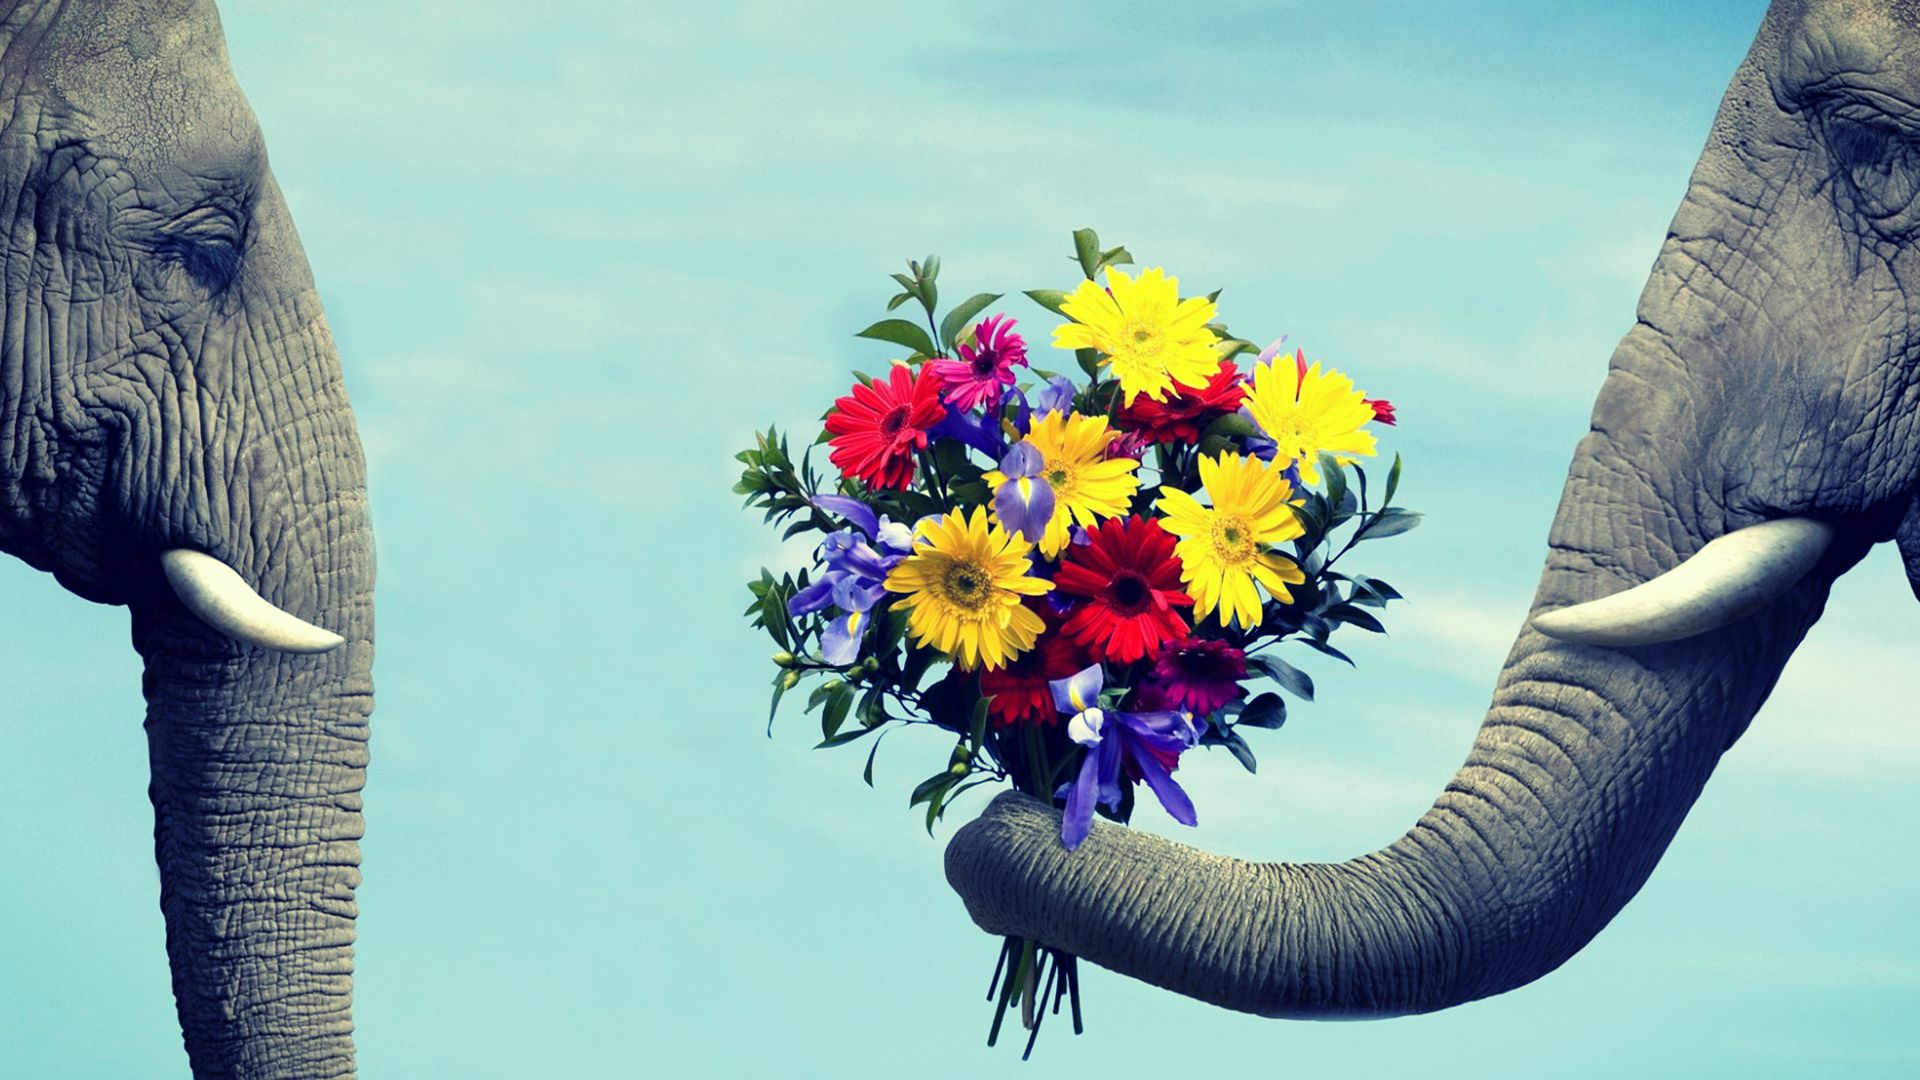 Love Image Of Cute Elephant Giving A Flower To Her Lover Wallpaper